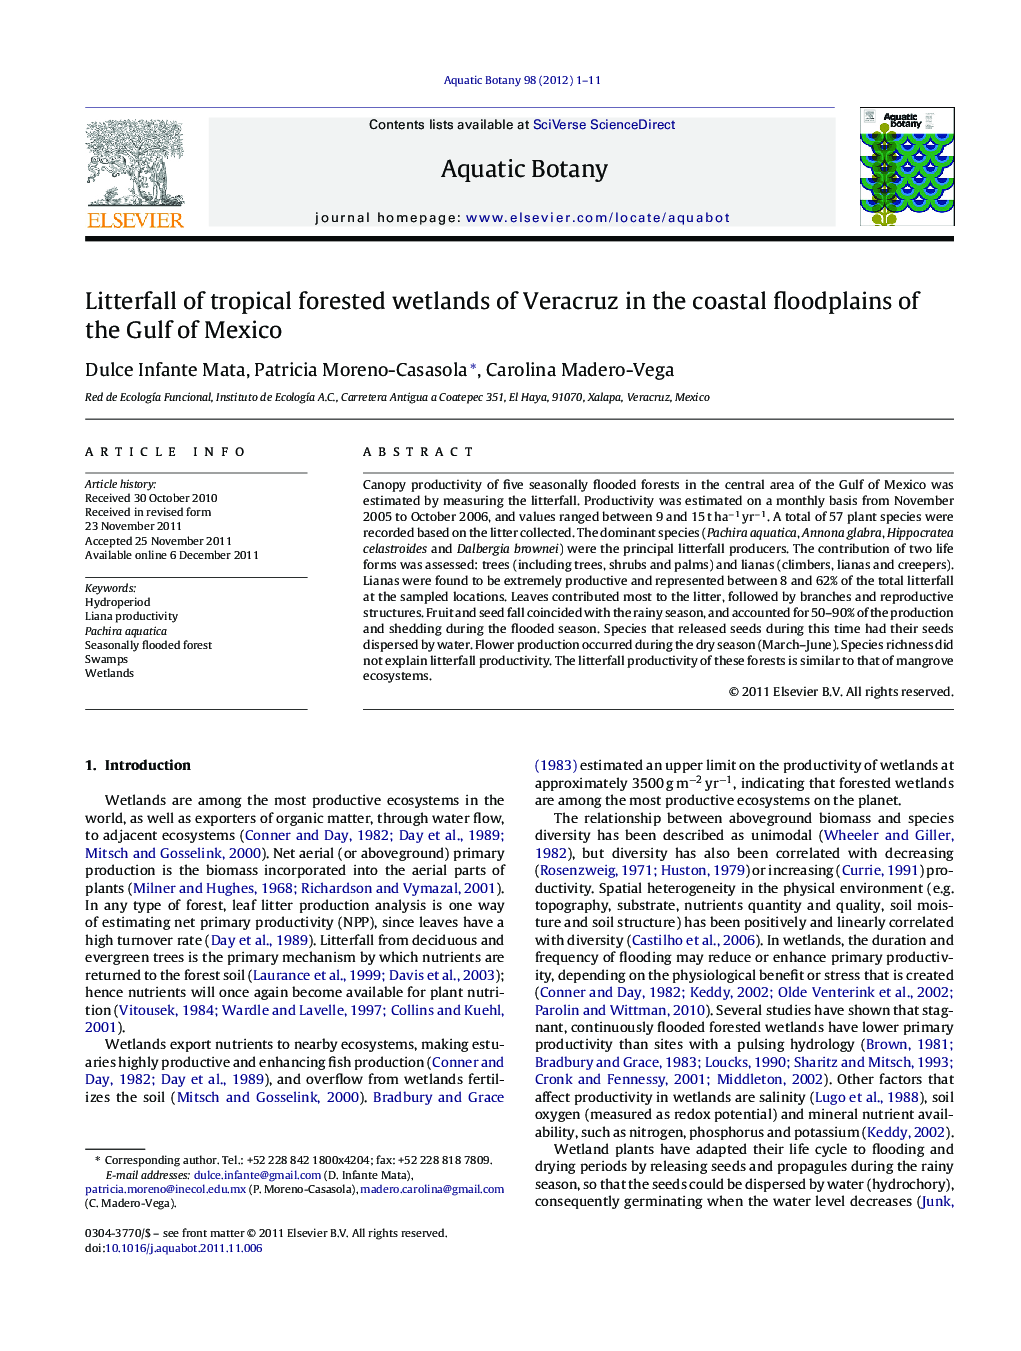 Litterfall of tropical forested wetlands of Veracruz in the coastal floodplains of the Gulf of Mexico